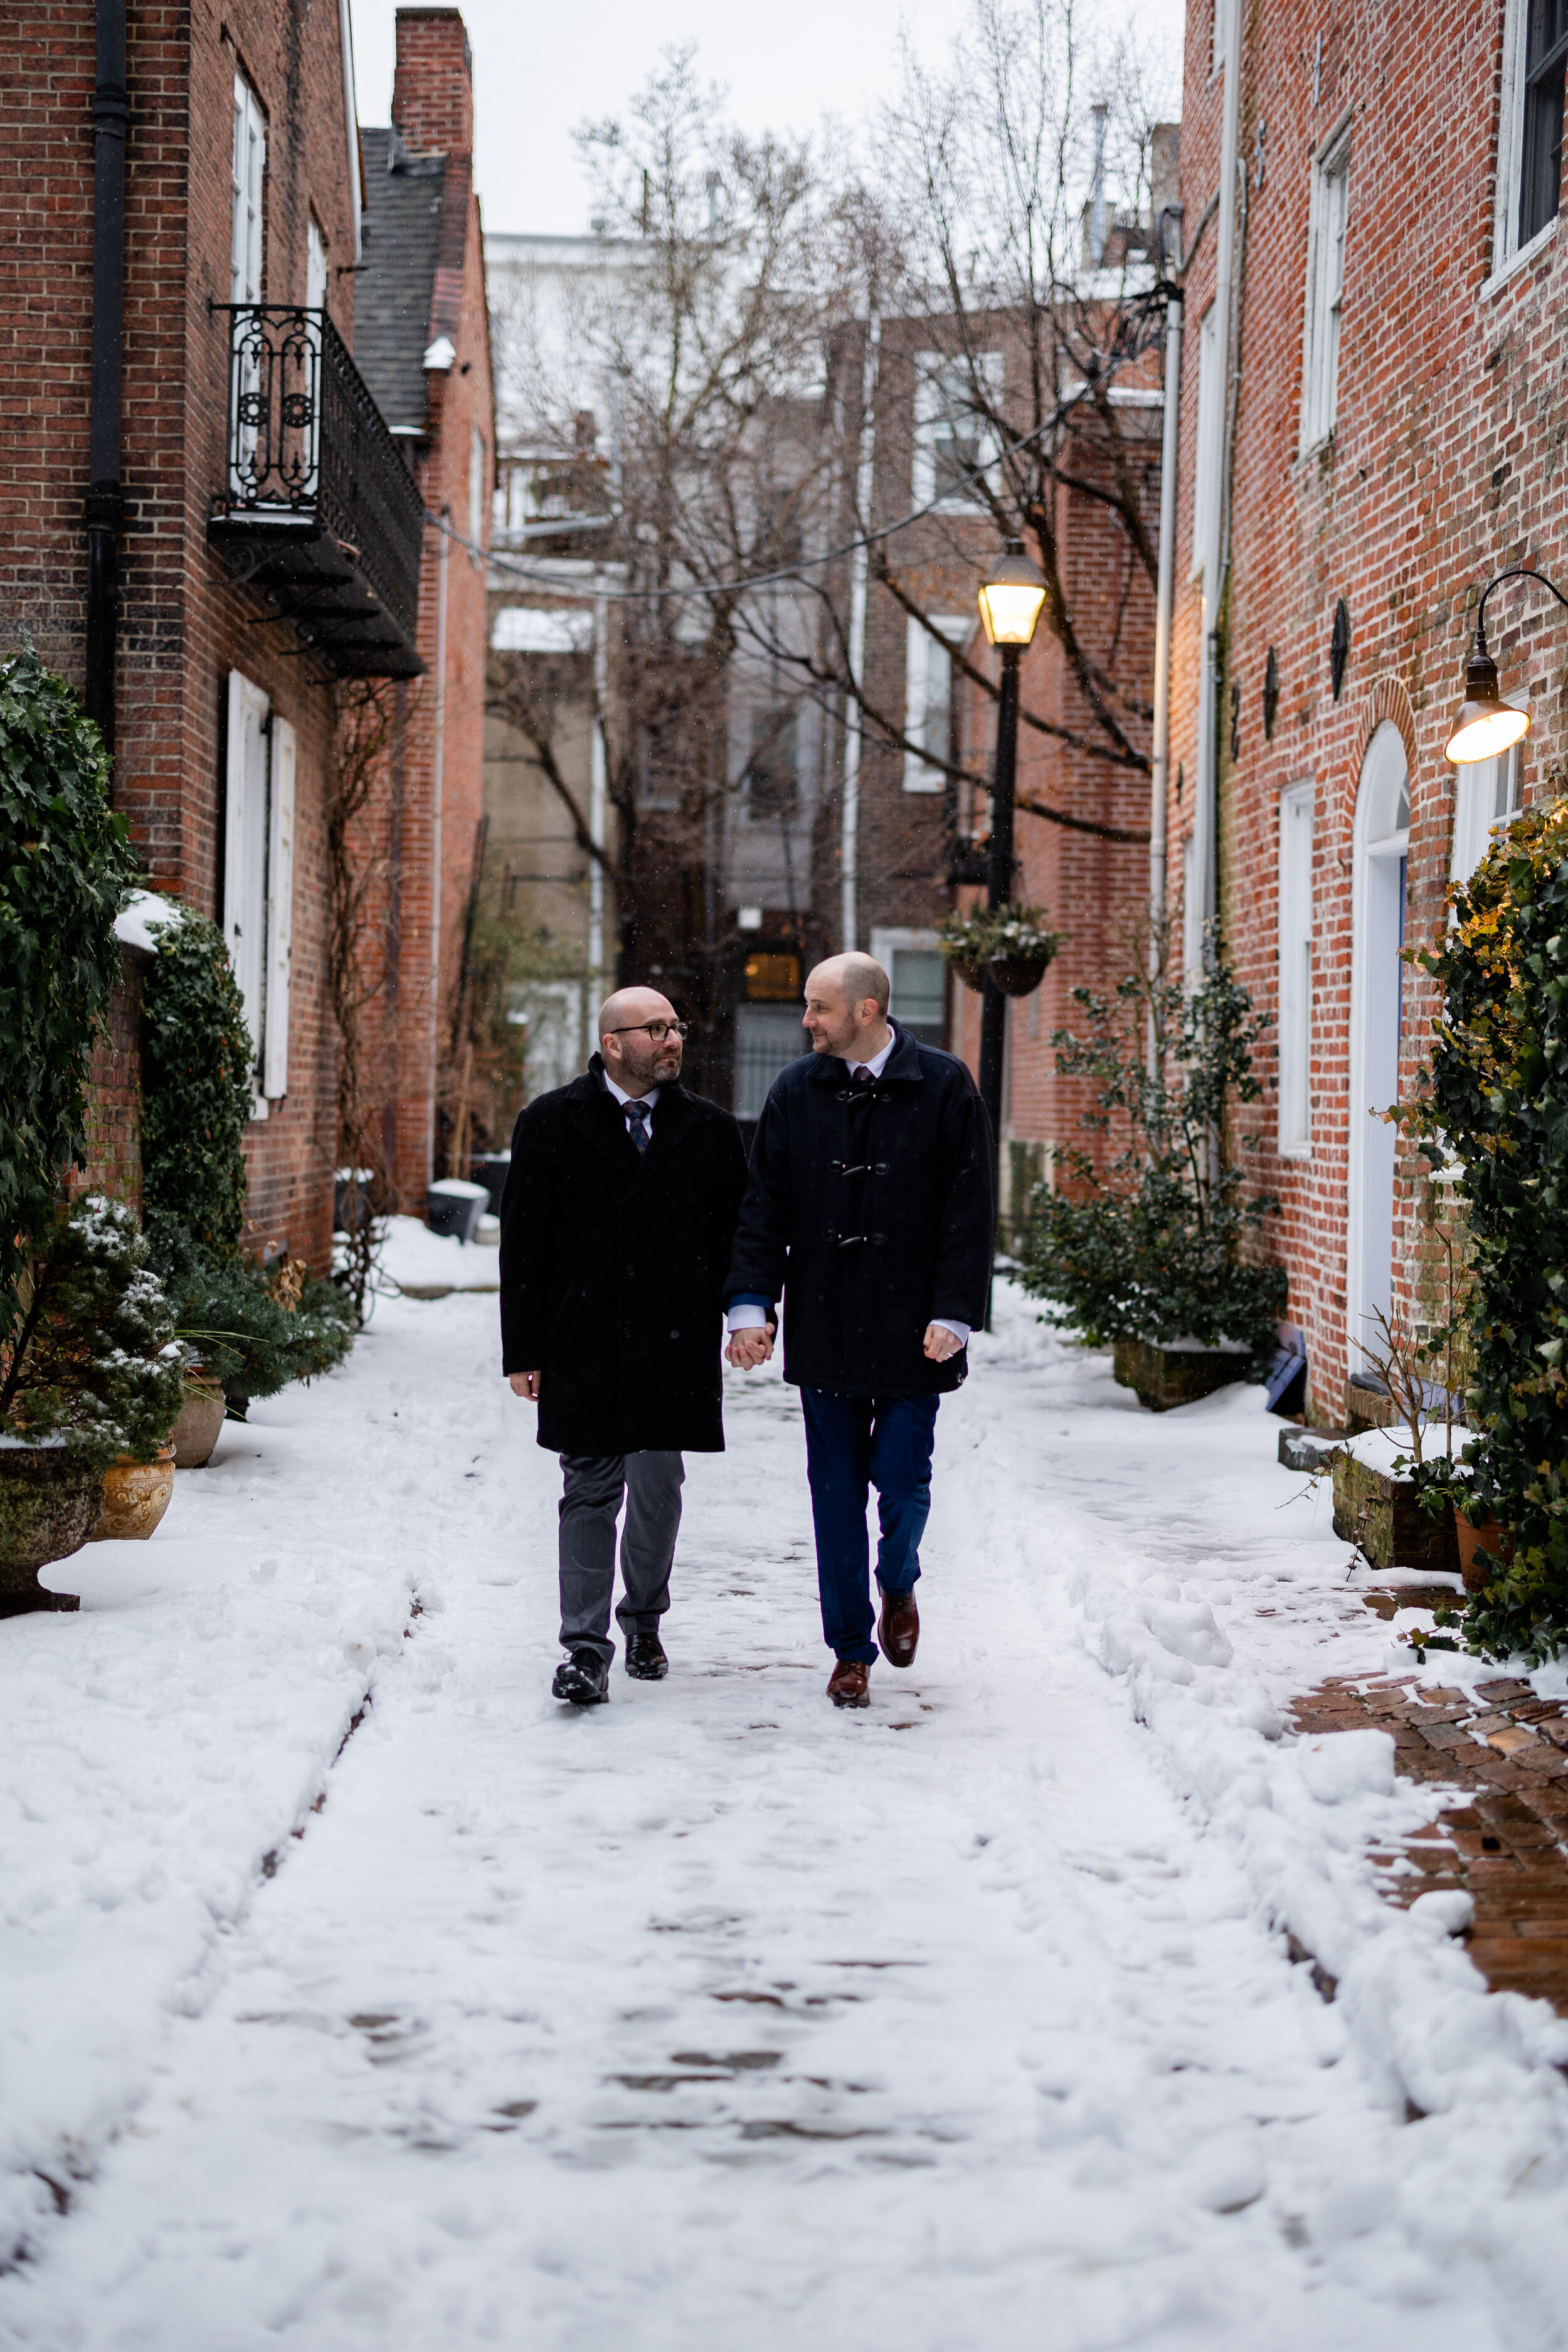 Curtis-and-Bill-Snowy-Vaux-Philly-Elopement-290.jpg